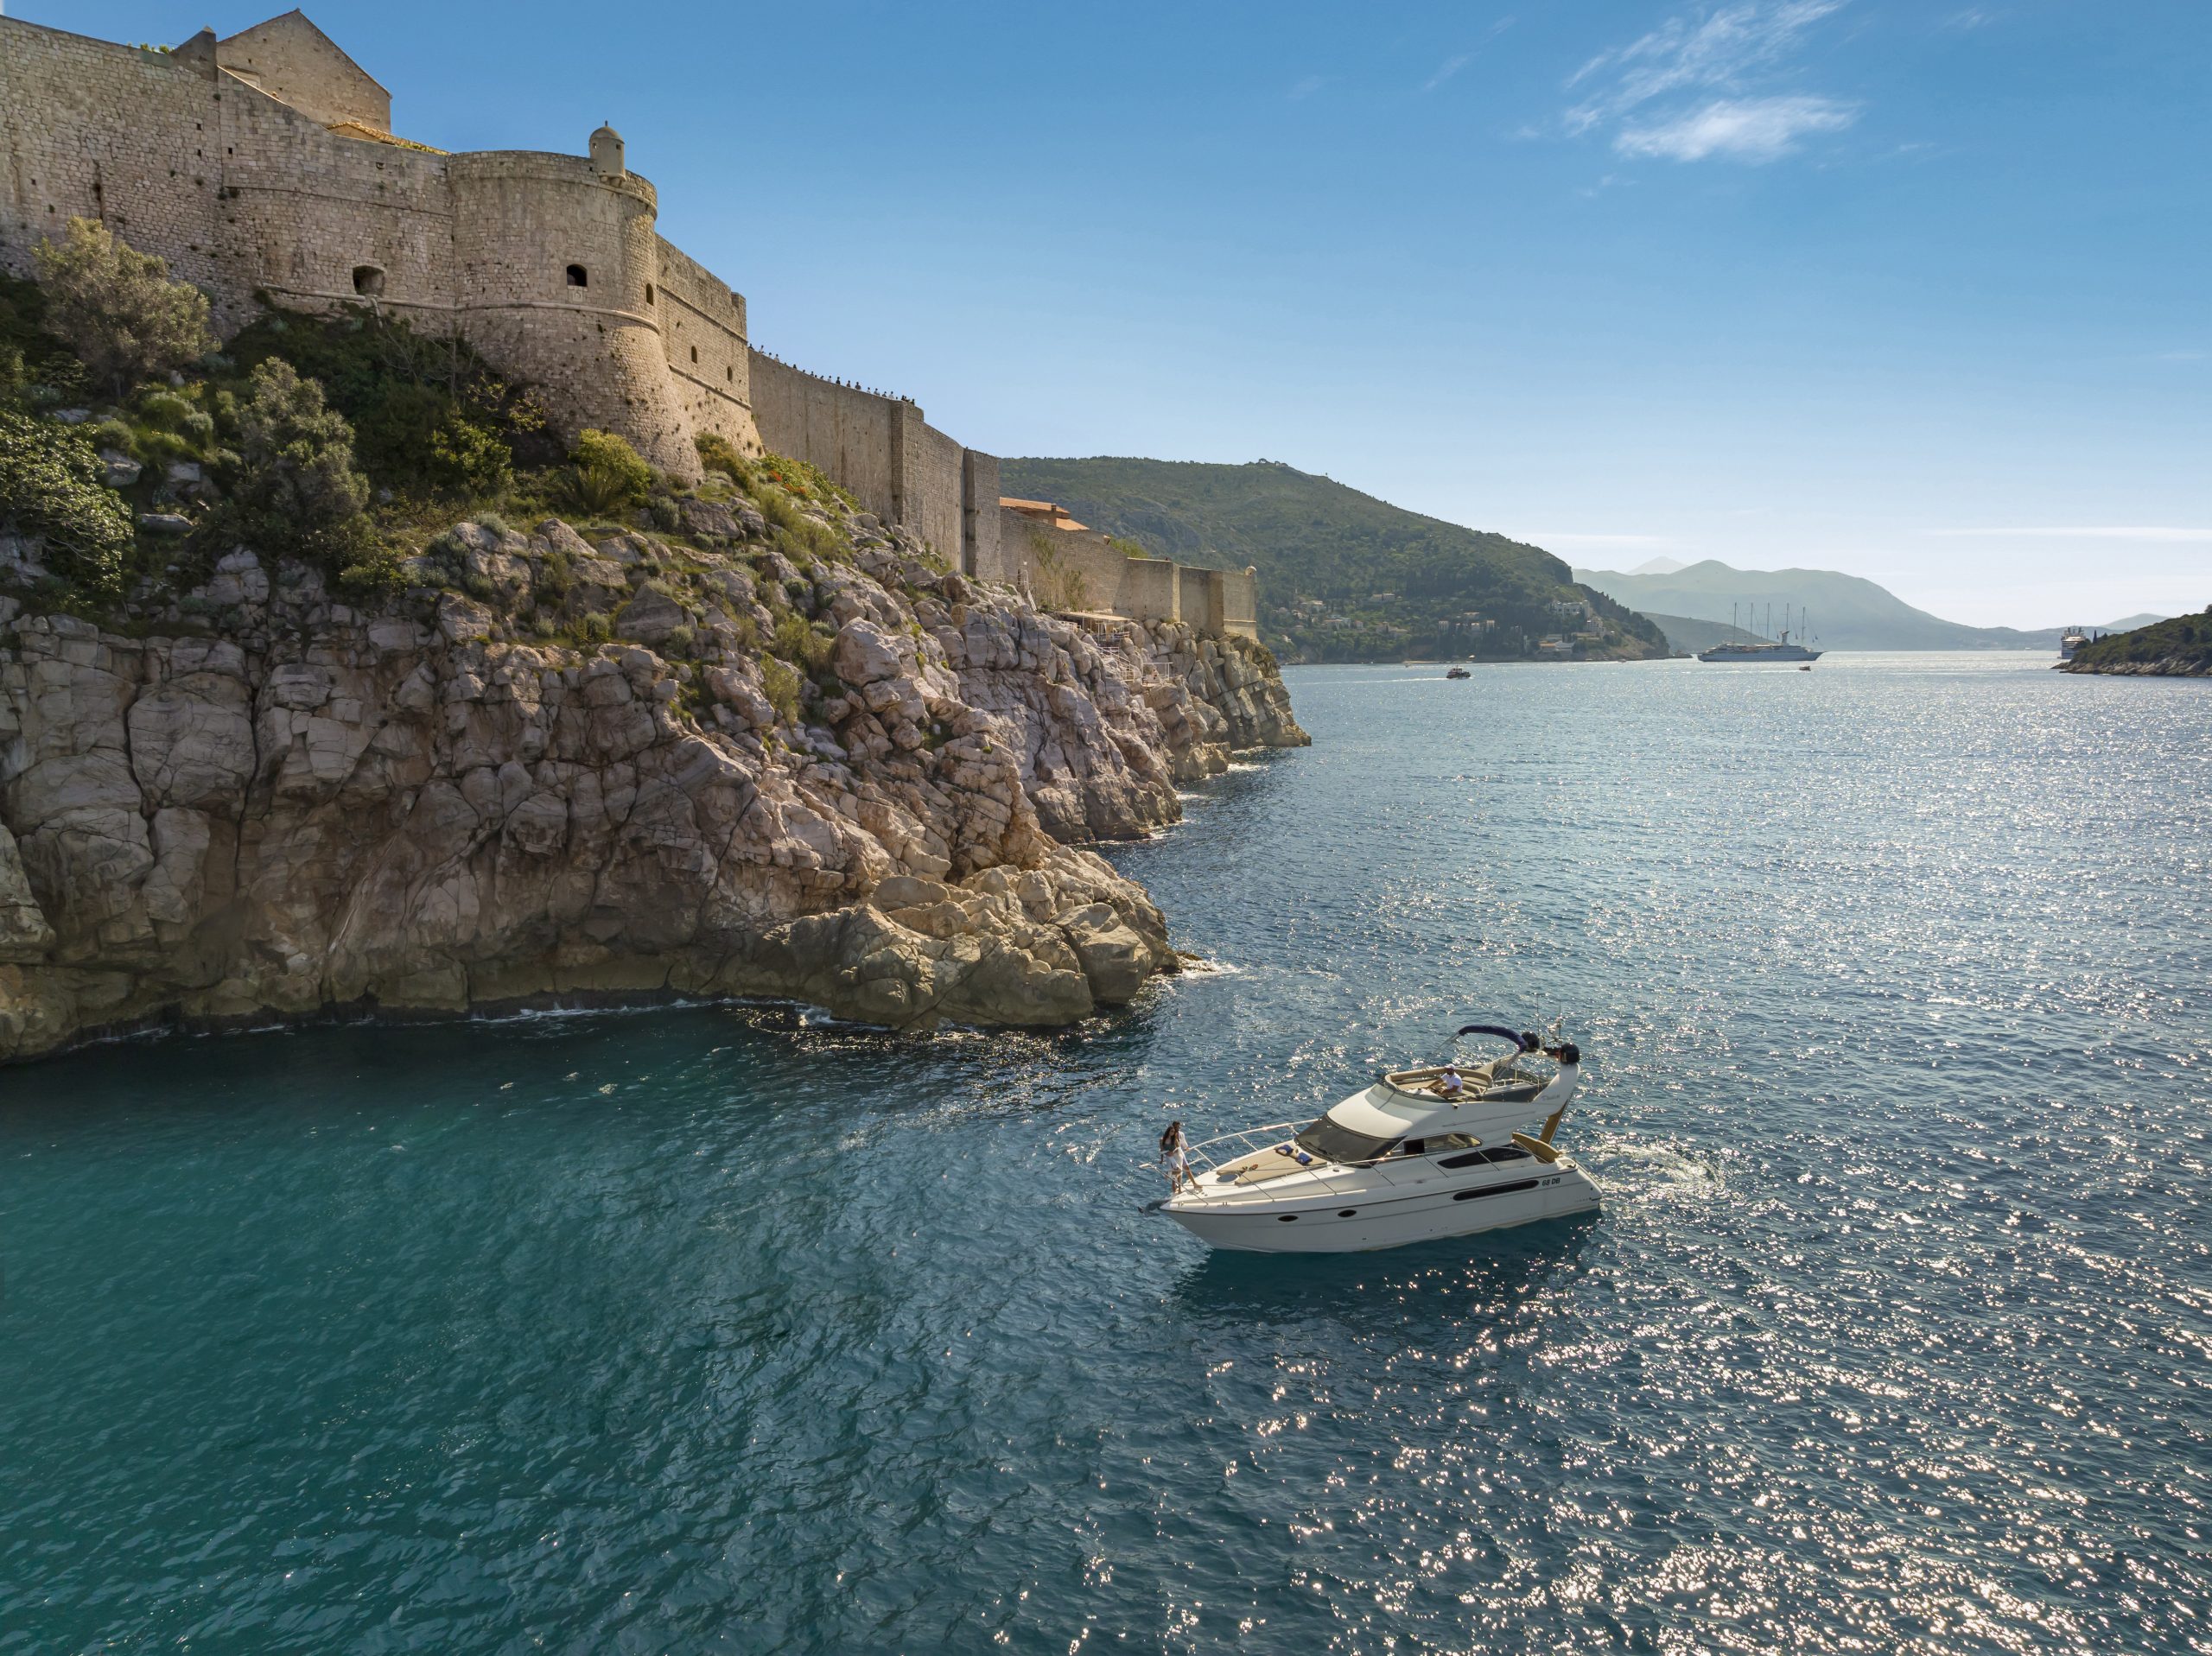 fairline phantom cruising around the old town dubrovnik, dubrovnik old town, dubrovnik lovrijenac, dubrovnik wedding on board, dubrovnik wedding on a yacht, dubrovnik engagement ideas